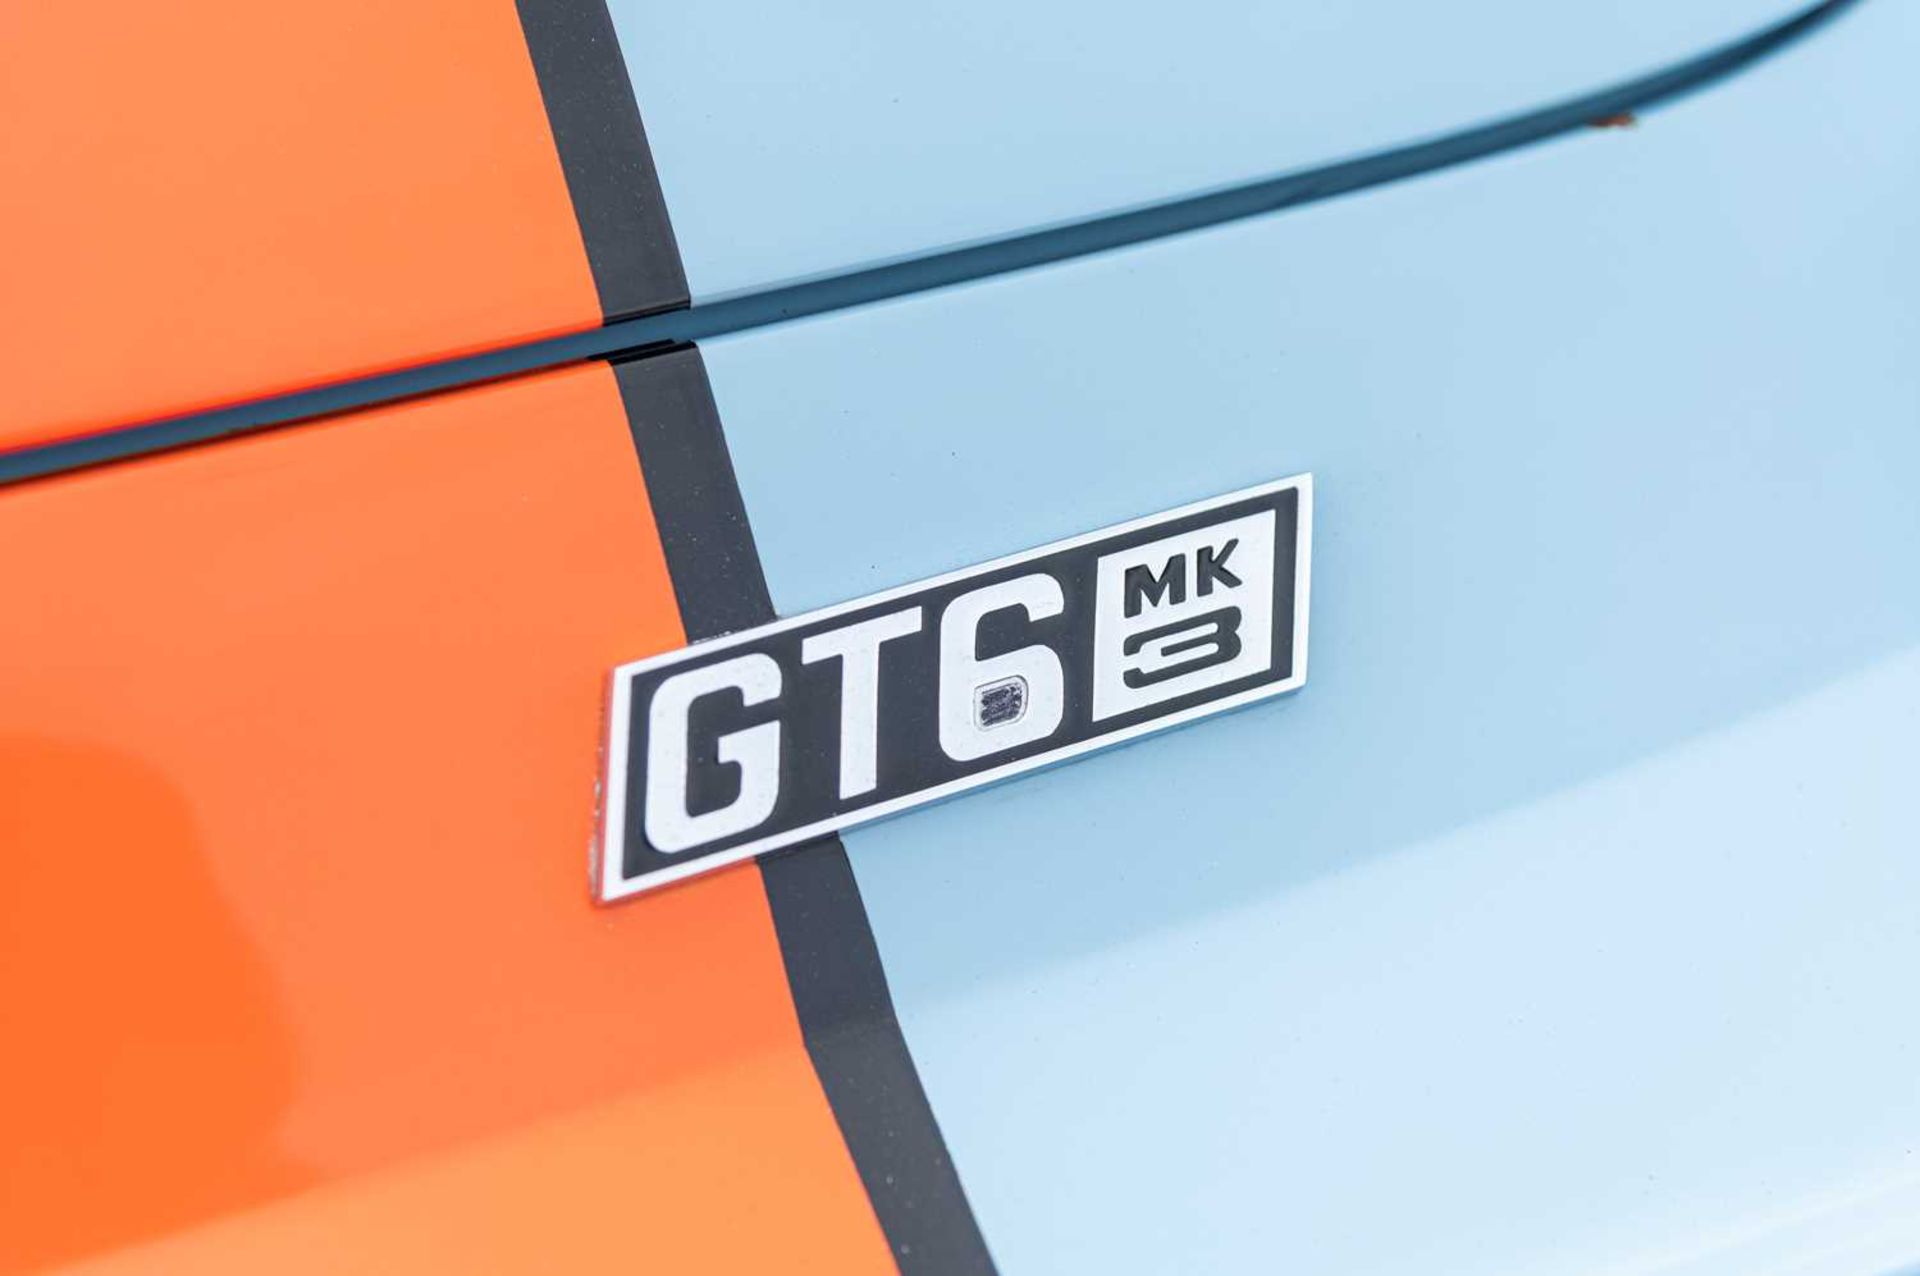 1973 Triumph GT6  ***NO RESERVE*** Presented in Gulf Racing-inspired paintwork, road-going track wea - Image 21 of 65